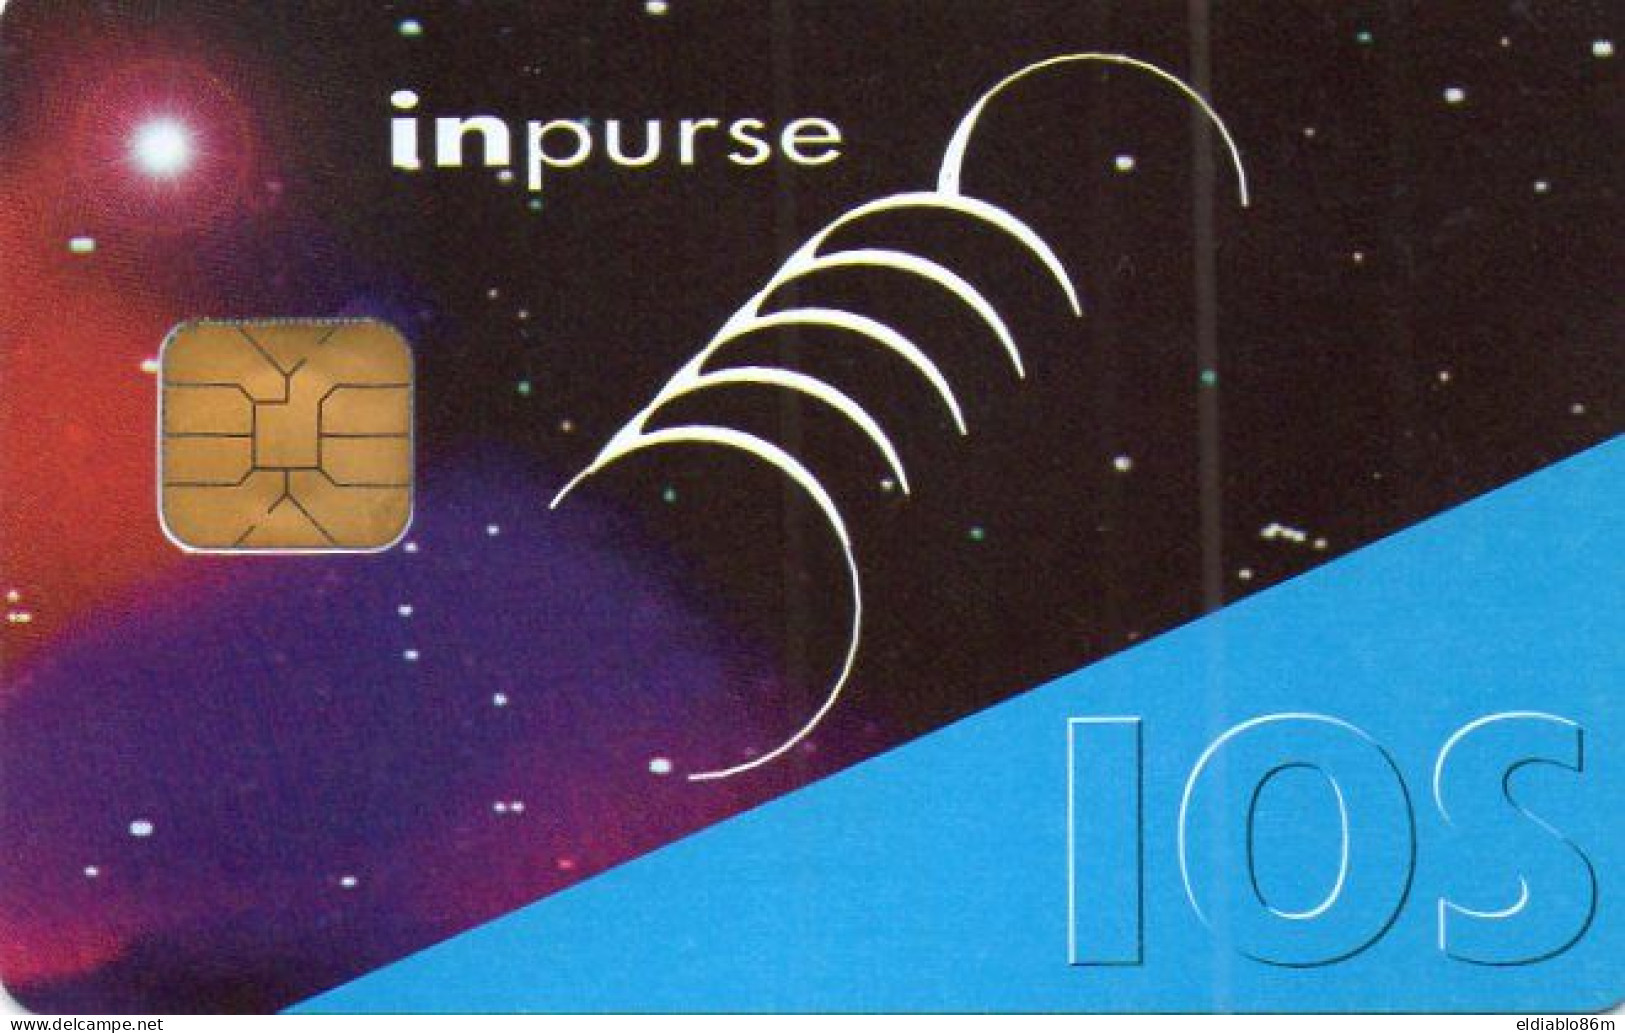 ITALY - CHIP CARD - TEST CARD - INCARD - INPURSE - STORED VALUE CARD BASIC - C&C 5513 - Tests & Diensten